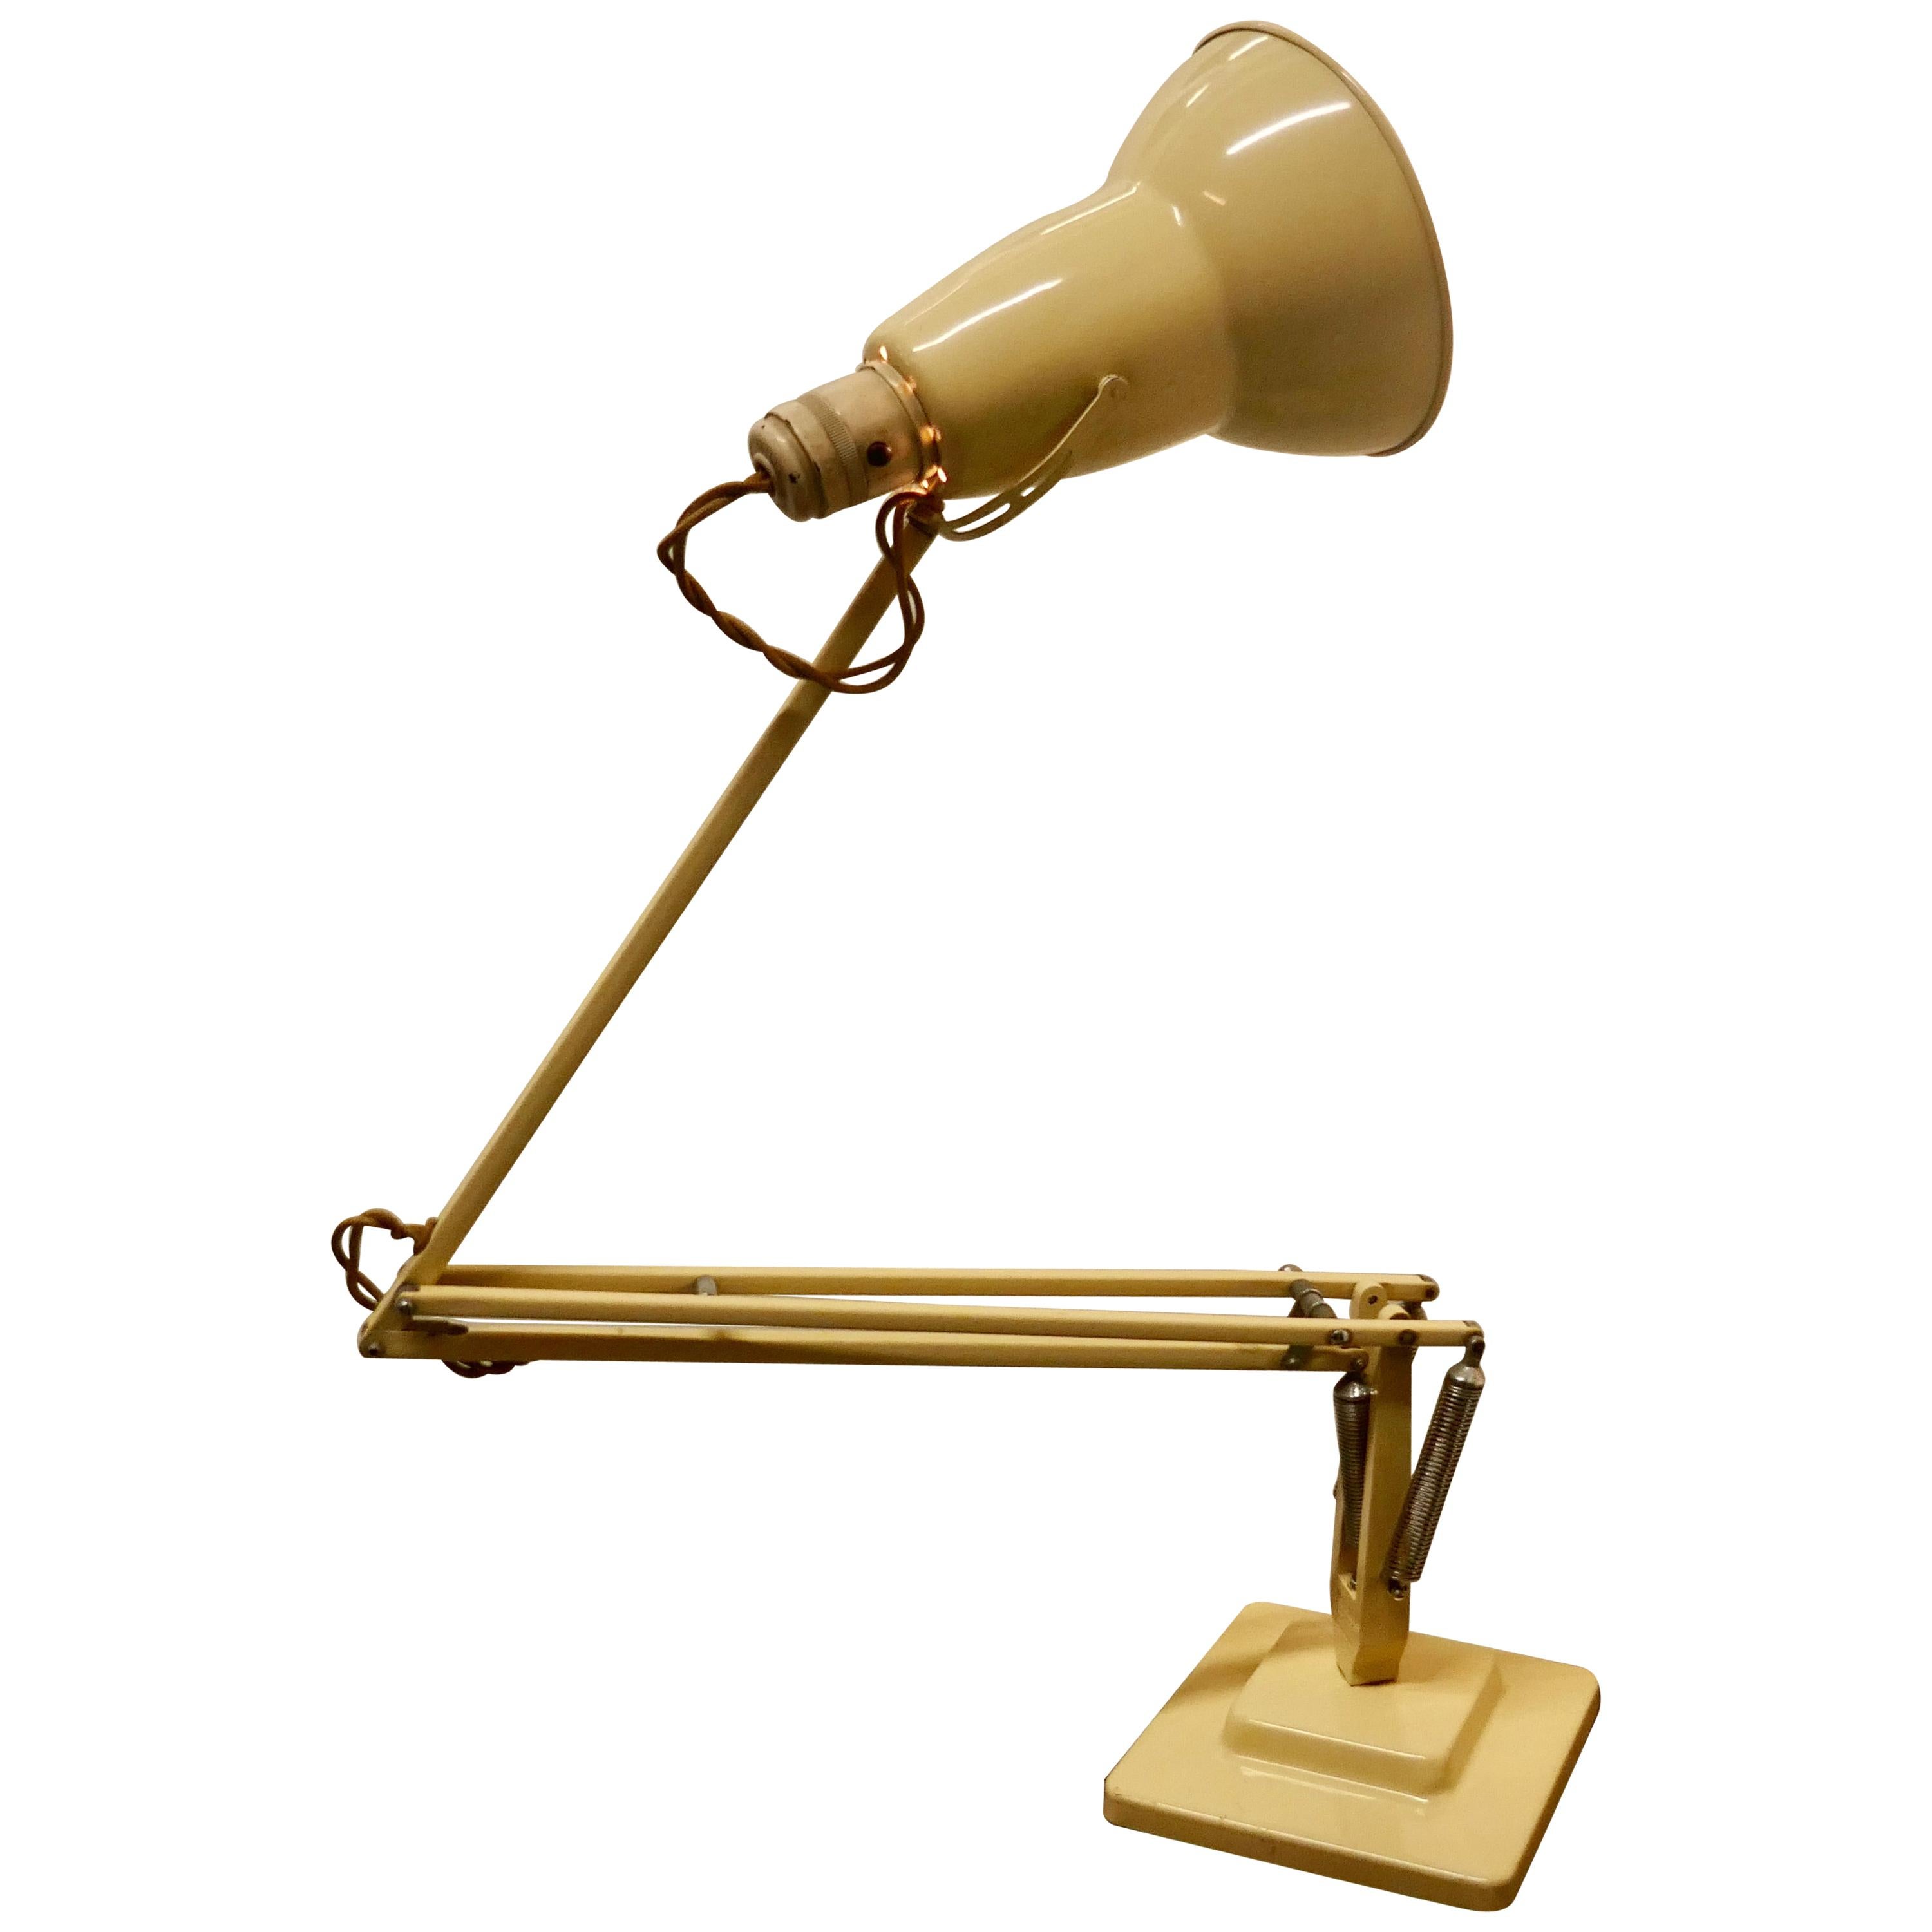 Original 1930s Anglepoise Lamp For Sale